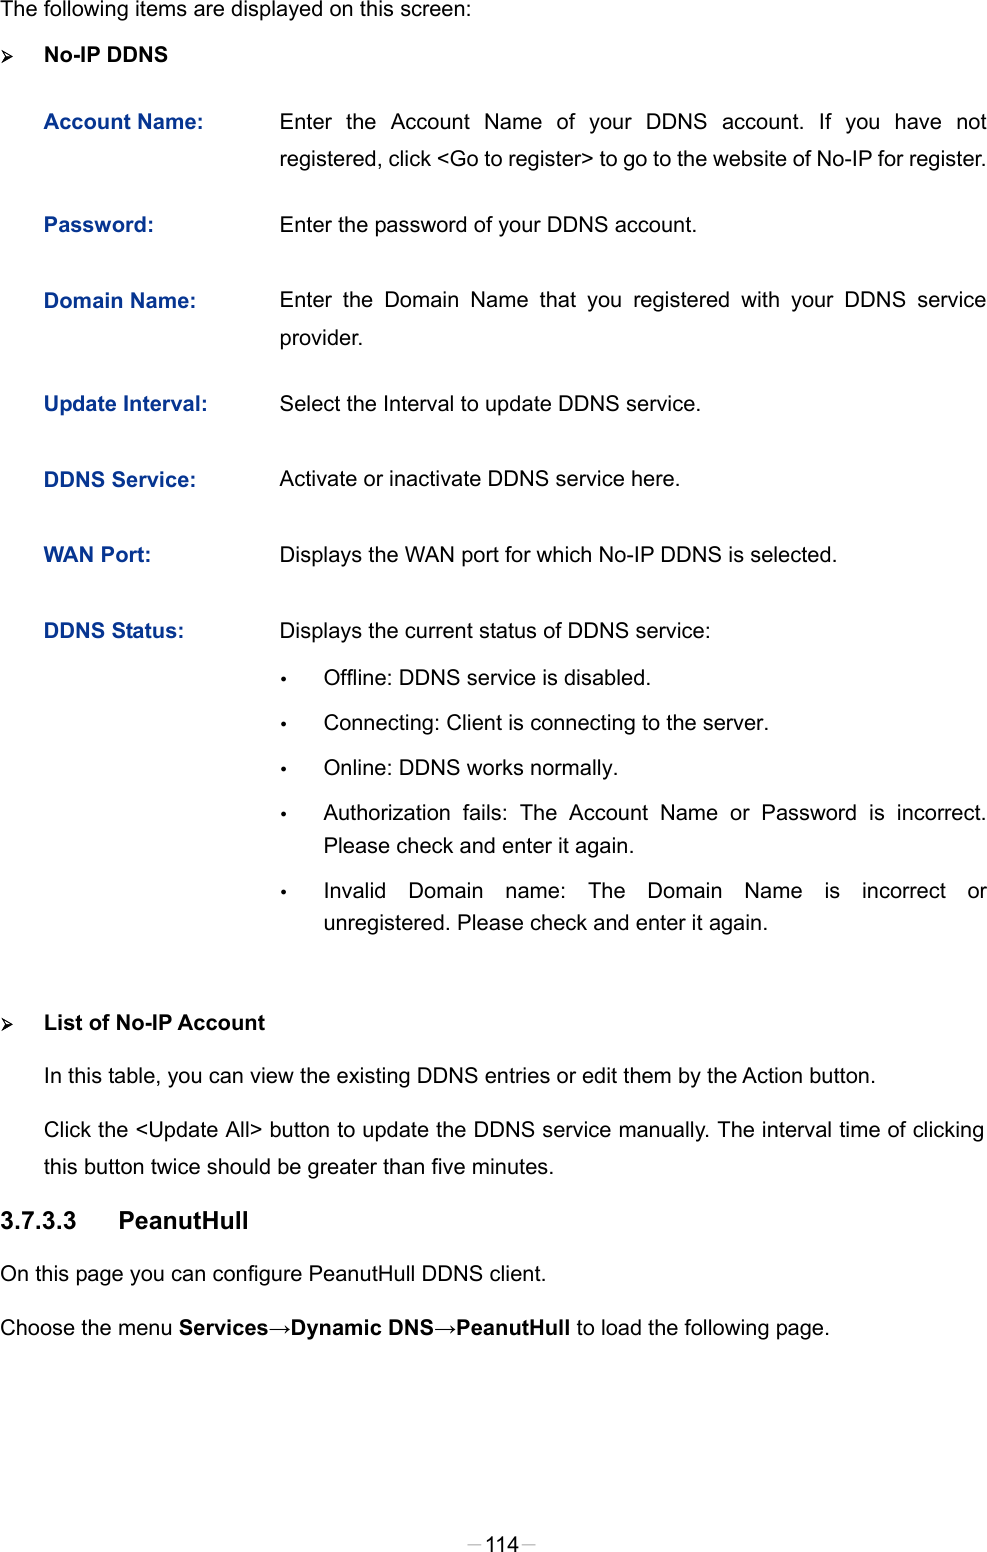  The following items are displayed on this screen:  No-IP DDNS Account Name: Enter the Account Name of your DDNS account. If you have not registered, click &lt;Go to register&gt; to go to the website of No-IP for register. Password: Enter the password of your DDNS account. Domain Name: Enter the Domain Name that you registered with your DDNS service provider. Update Interval: Select the Interval to update DDNS service. DDNS Service: Activate or inactivate DDNS service here. WAN Port: Displays the WAN port for which No-IP DDNS is selected. DDNS Status: Displays the current status of DDNS service:  Offline: DDNS service is disabled.  Connecting: Client is connecting to the server.  Online: DDNS works normally.  Authorization fails: The Account Name or Password is incorrect. Please check and enter it again.  Invalid Domain name: The Domain Name is incorrect or unregistered. Please check and enter it again.  List of No-IP Account In this table, you can view the existing DDNS entries or edit them by the Action button. Click the &lt;Update All&gt; button to update the DDNS service manually. The interval time of clicking this button twice should be greater than five minutes. 3.7.3.3 PeanutHull On this page you can configure PeanutHull DDNS client. Choose the menu Services→Dynamic DNS→PeanutHull to load the following page. -114- 